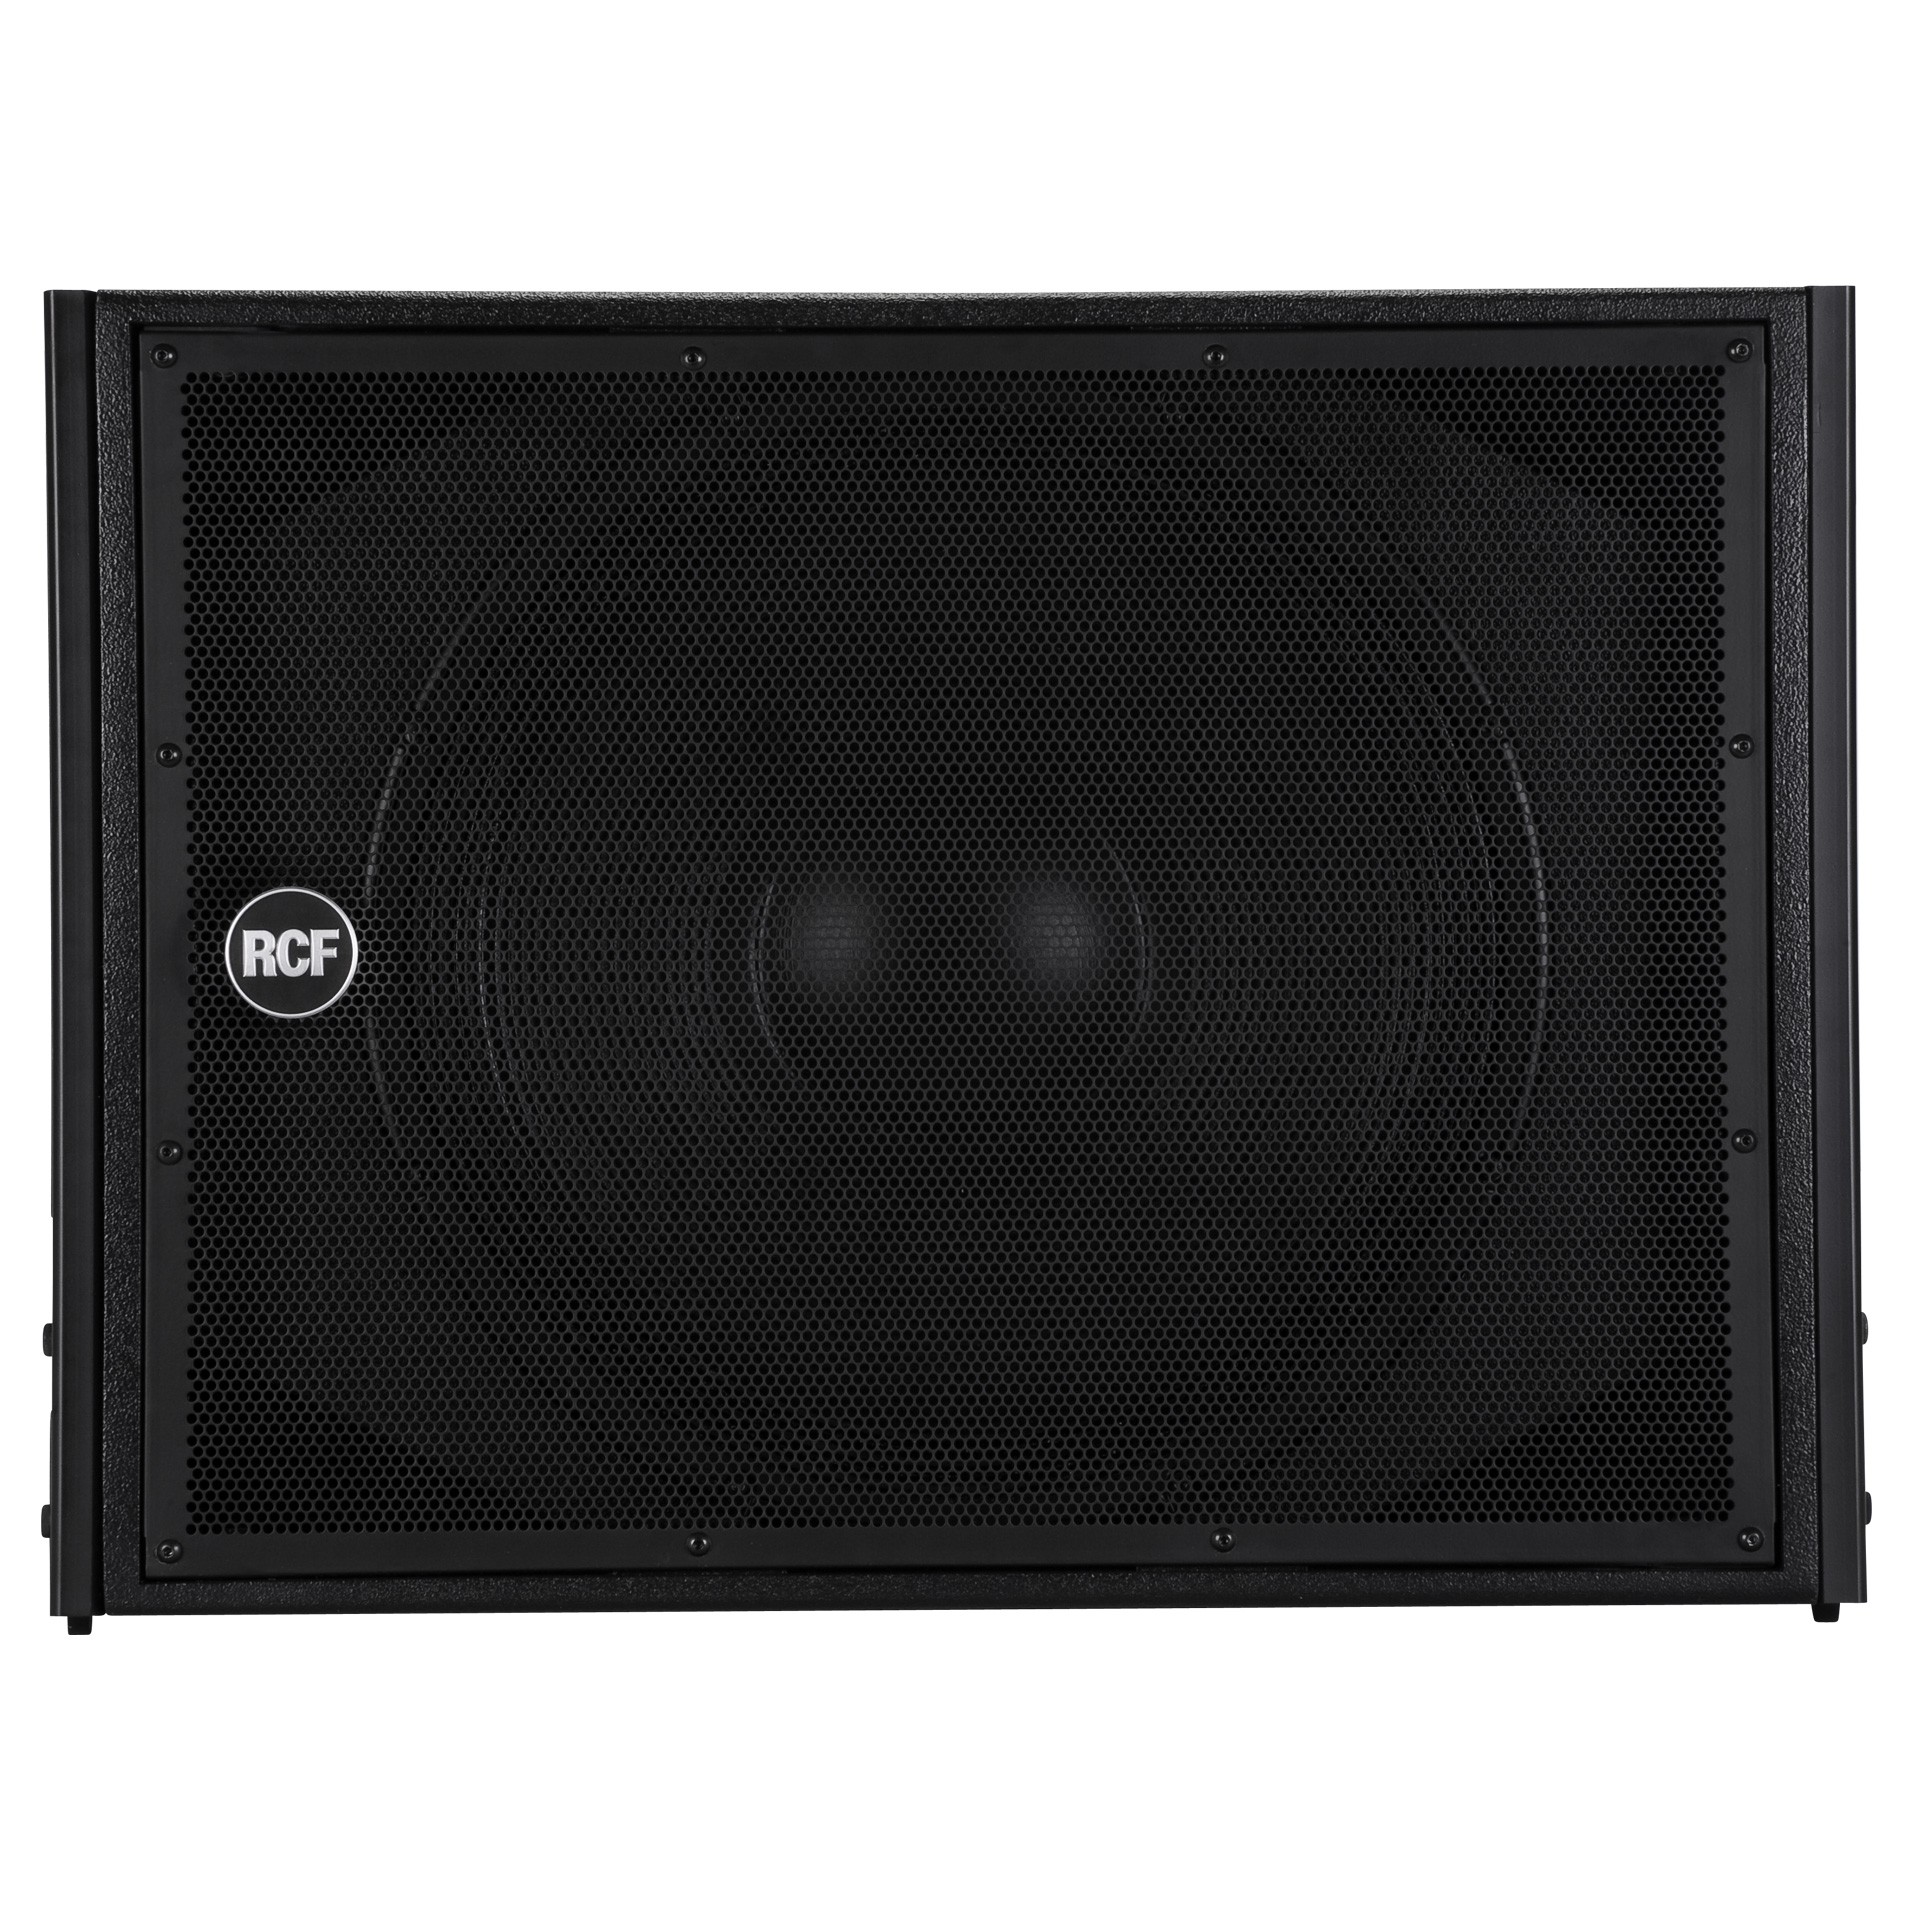 Subwoofere pro - Subwoofer activ RCF HDL 18-AS, audioclub.ro